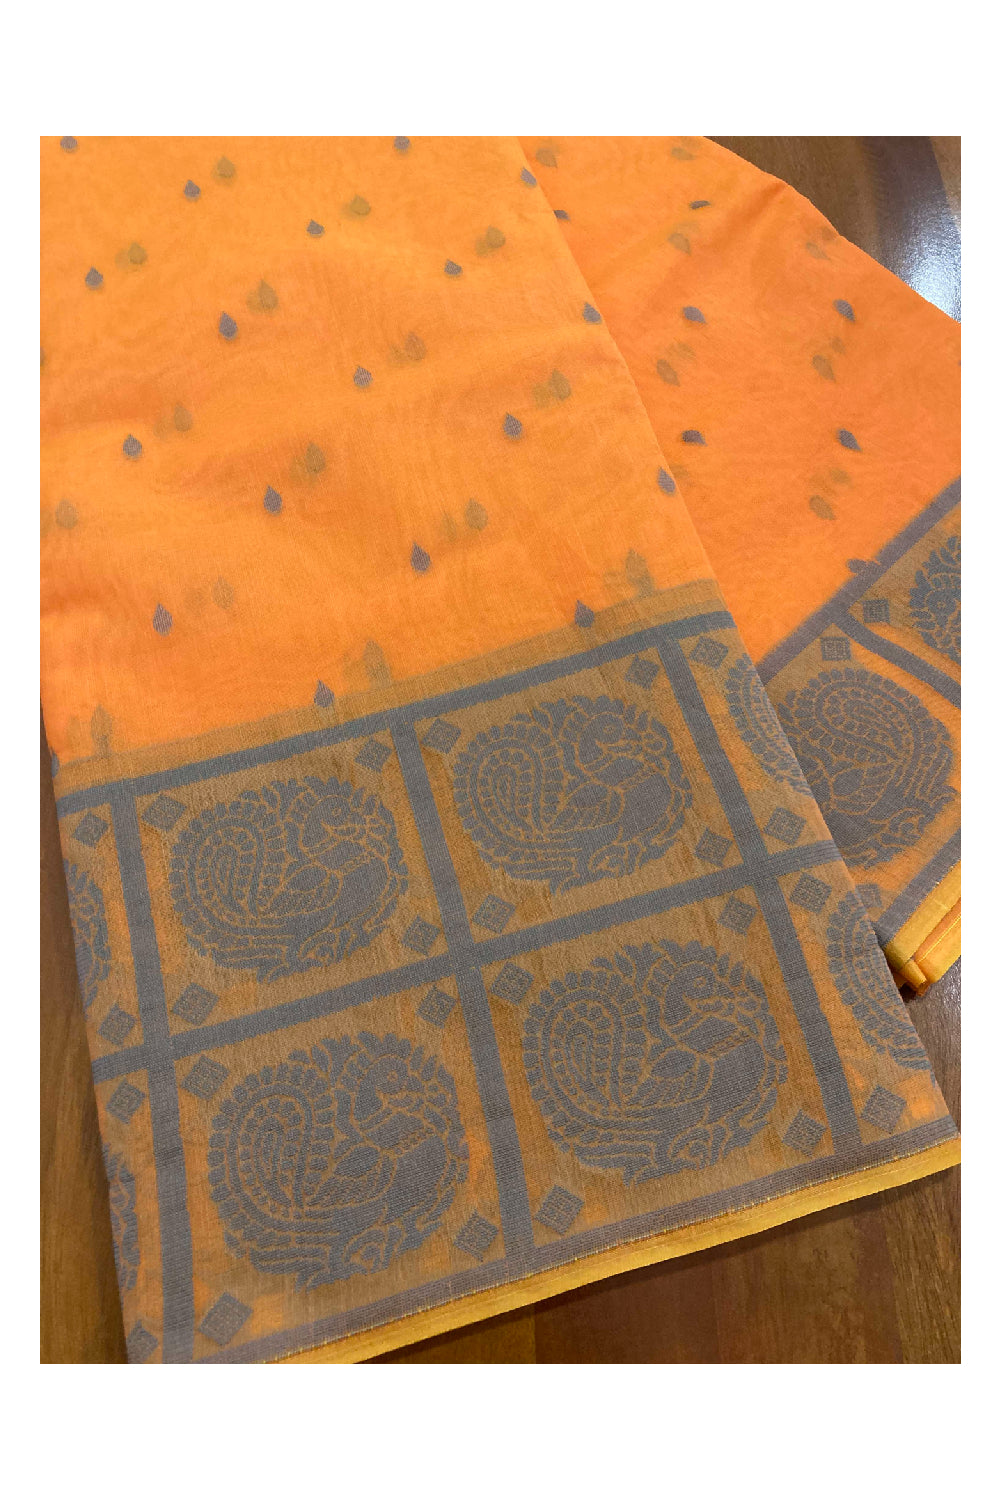 Southloom Sico Gadwal Semi Silk Saree in Orange and Grey with Peacock Motifs (Blouse Piece with Work)